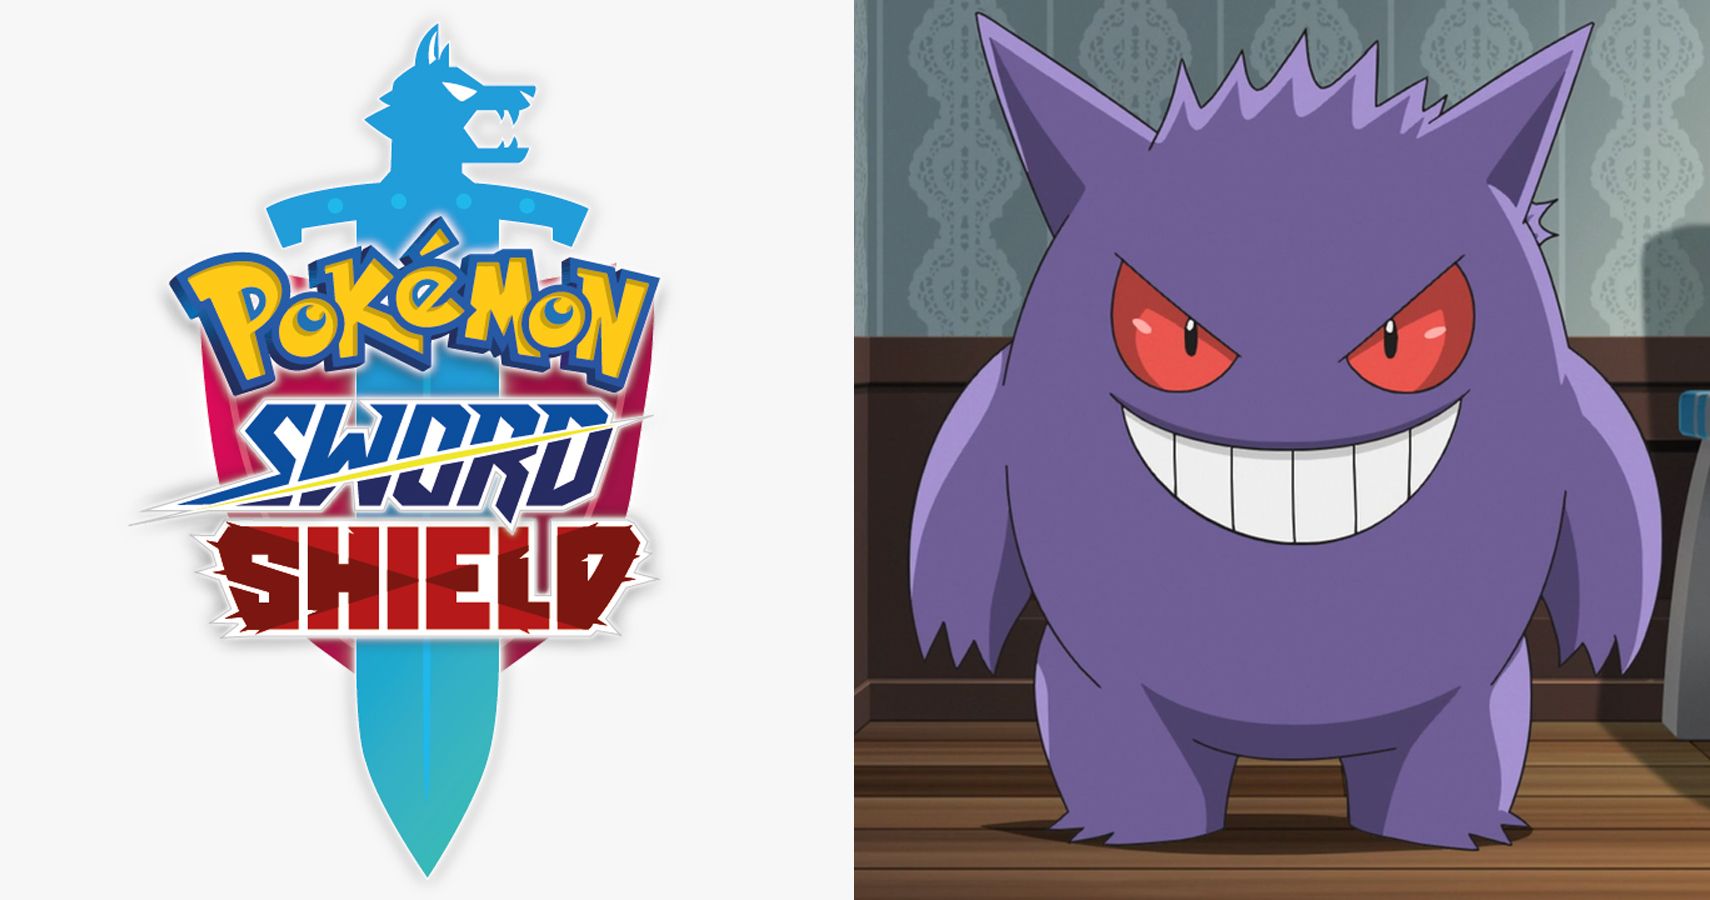 Pokemon Sword and Shield Won't Support All Pokemon Species Because